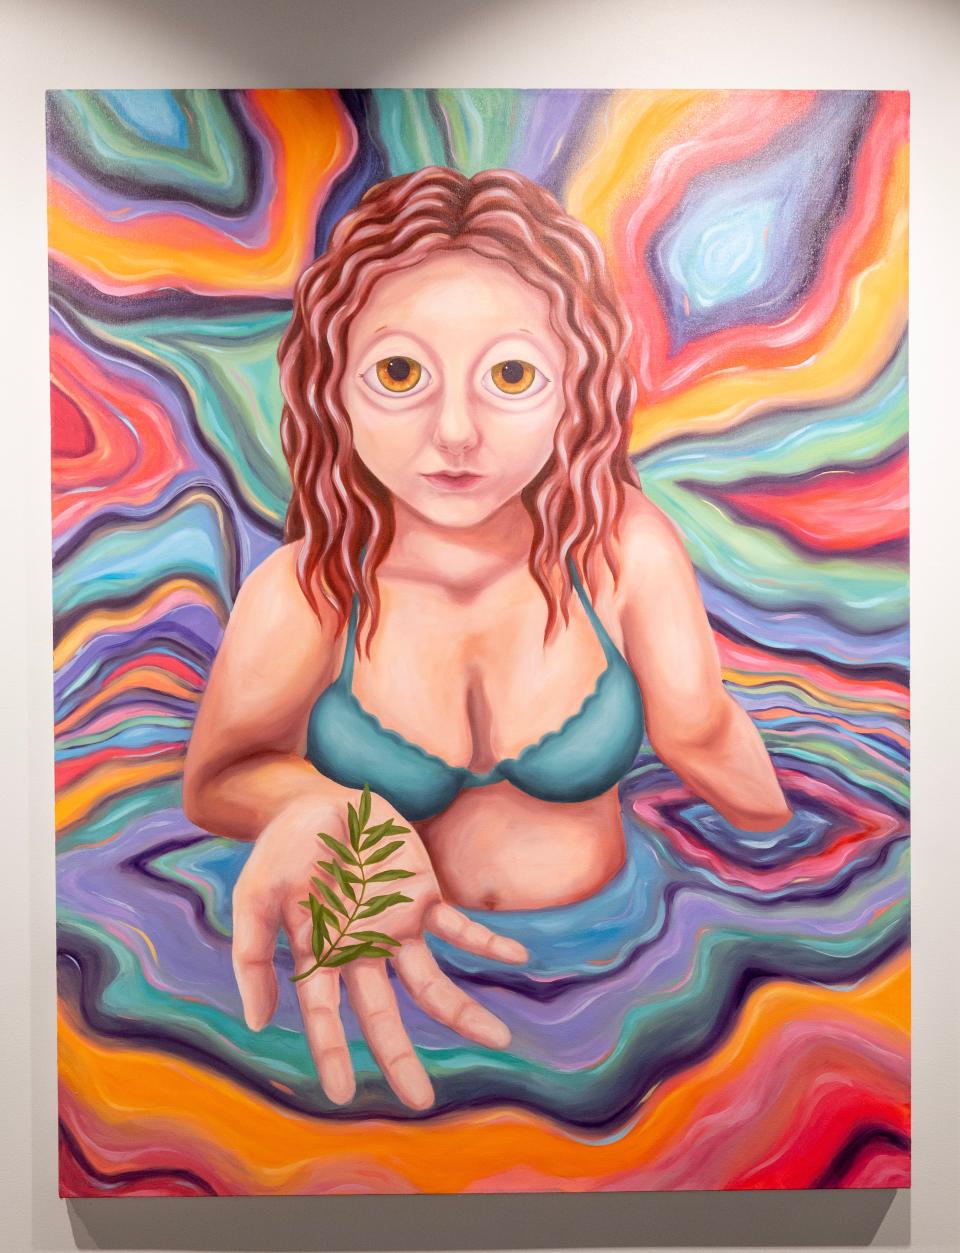 Massillon artist Maria McDonald's artwork will be featured in Massillon Museum's Studio M. The large-scale oil paintings depict self-portraits, as well as women in a fantasy world where they can be free.